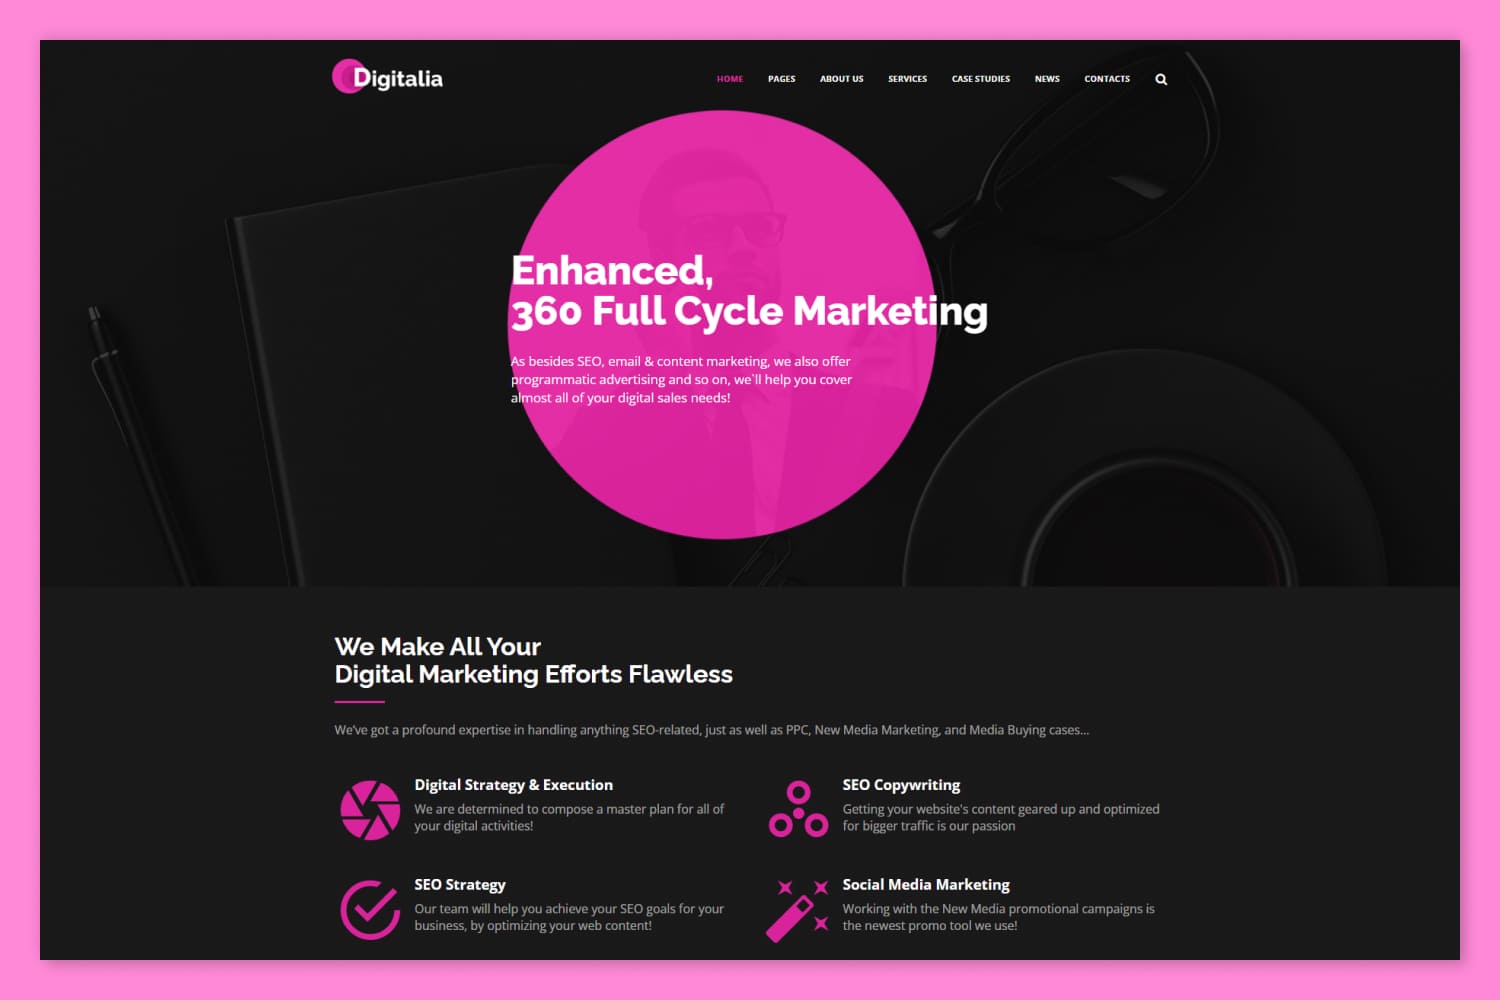 Website screenshot with black background, pink circle and white text.